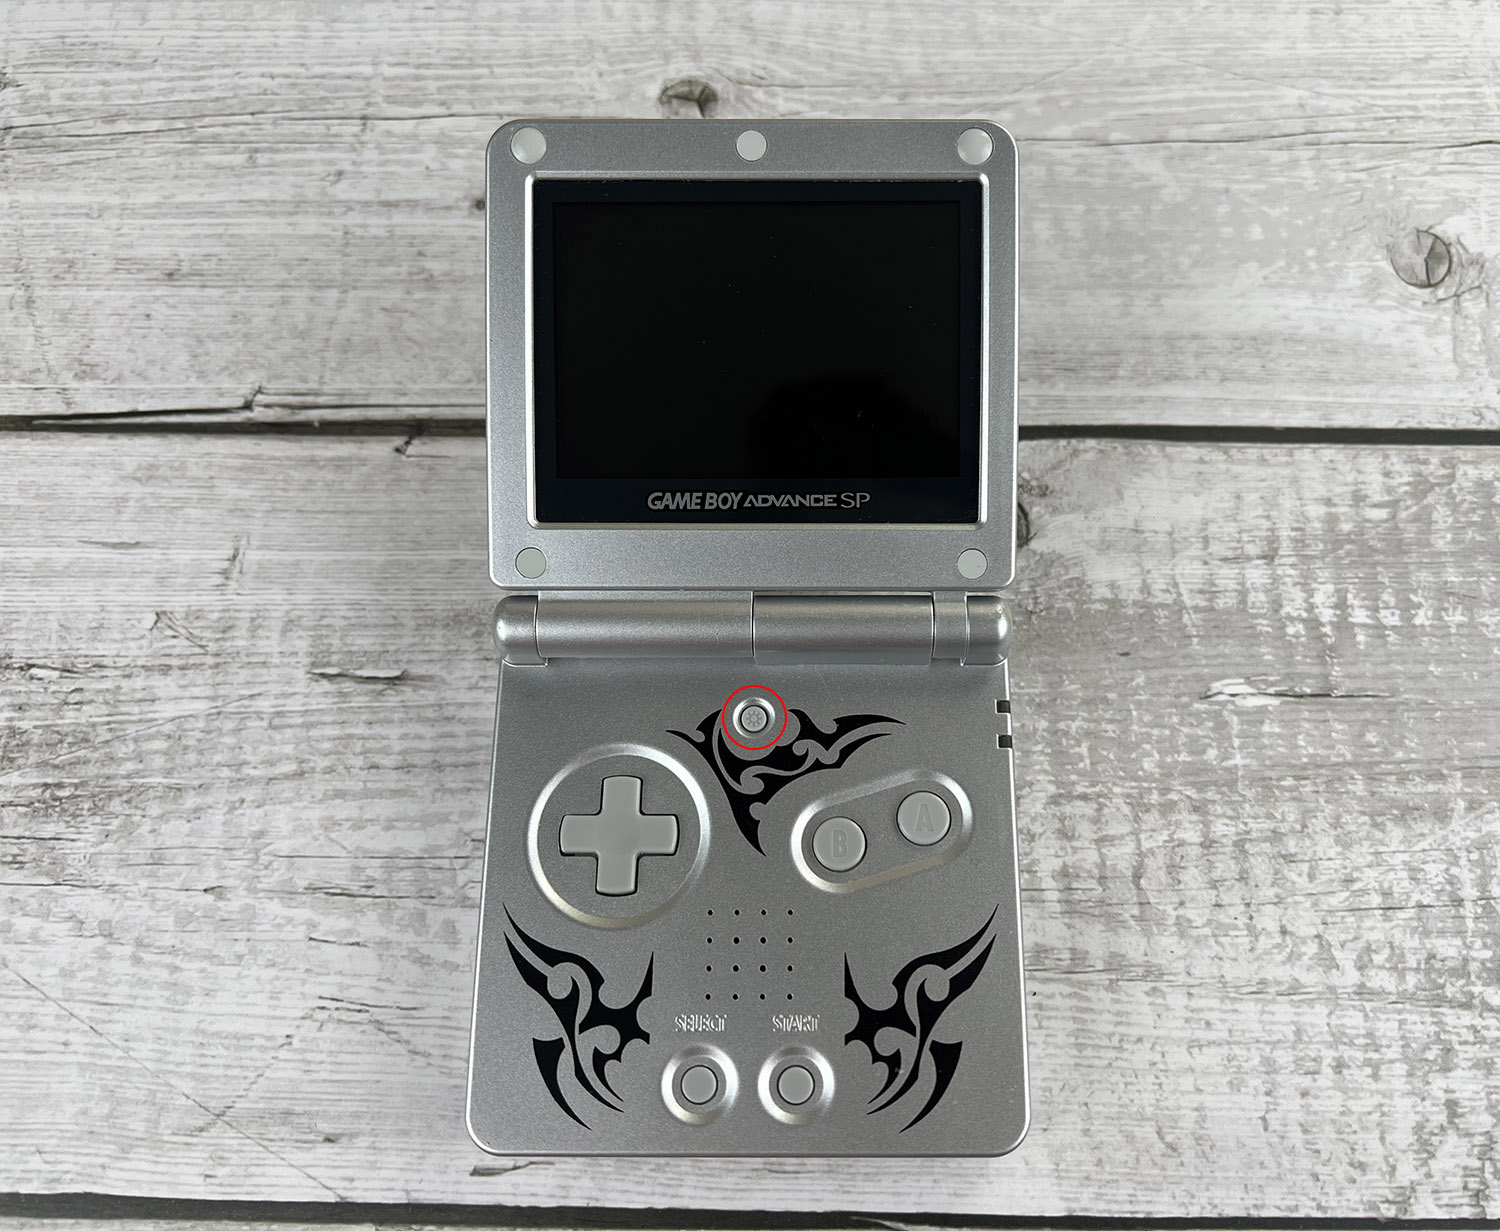 Game Boy Advance SP AGS-001 и Game Boy Advance SP AGS-101